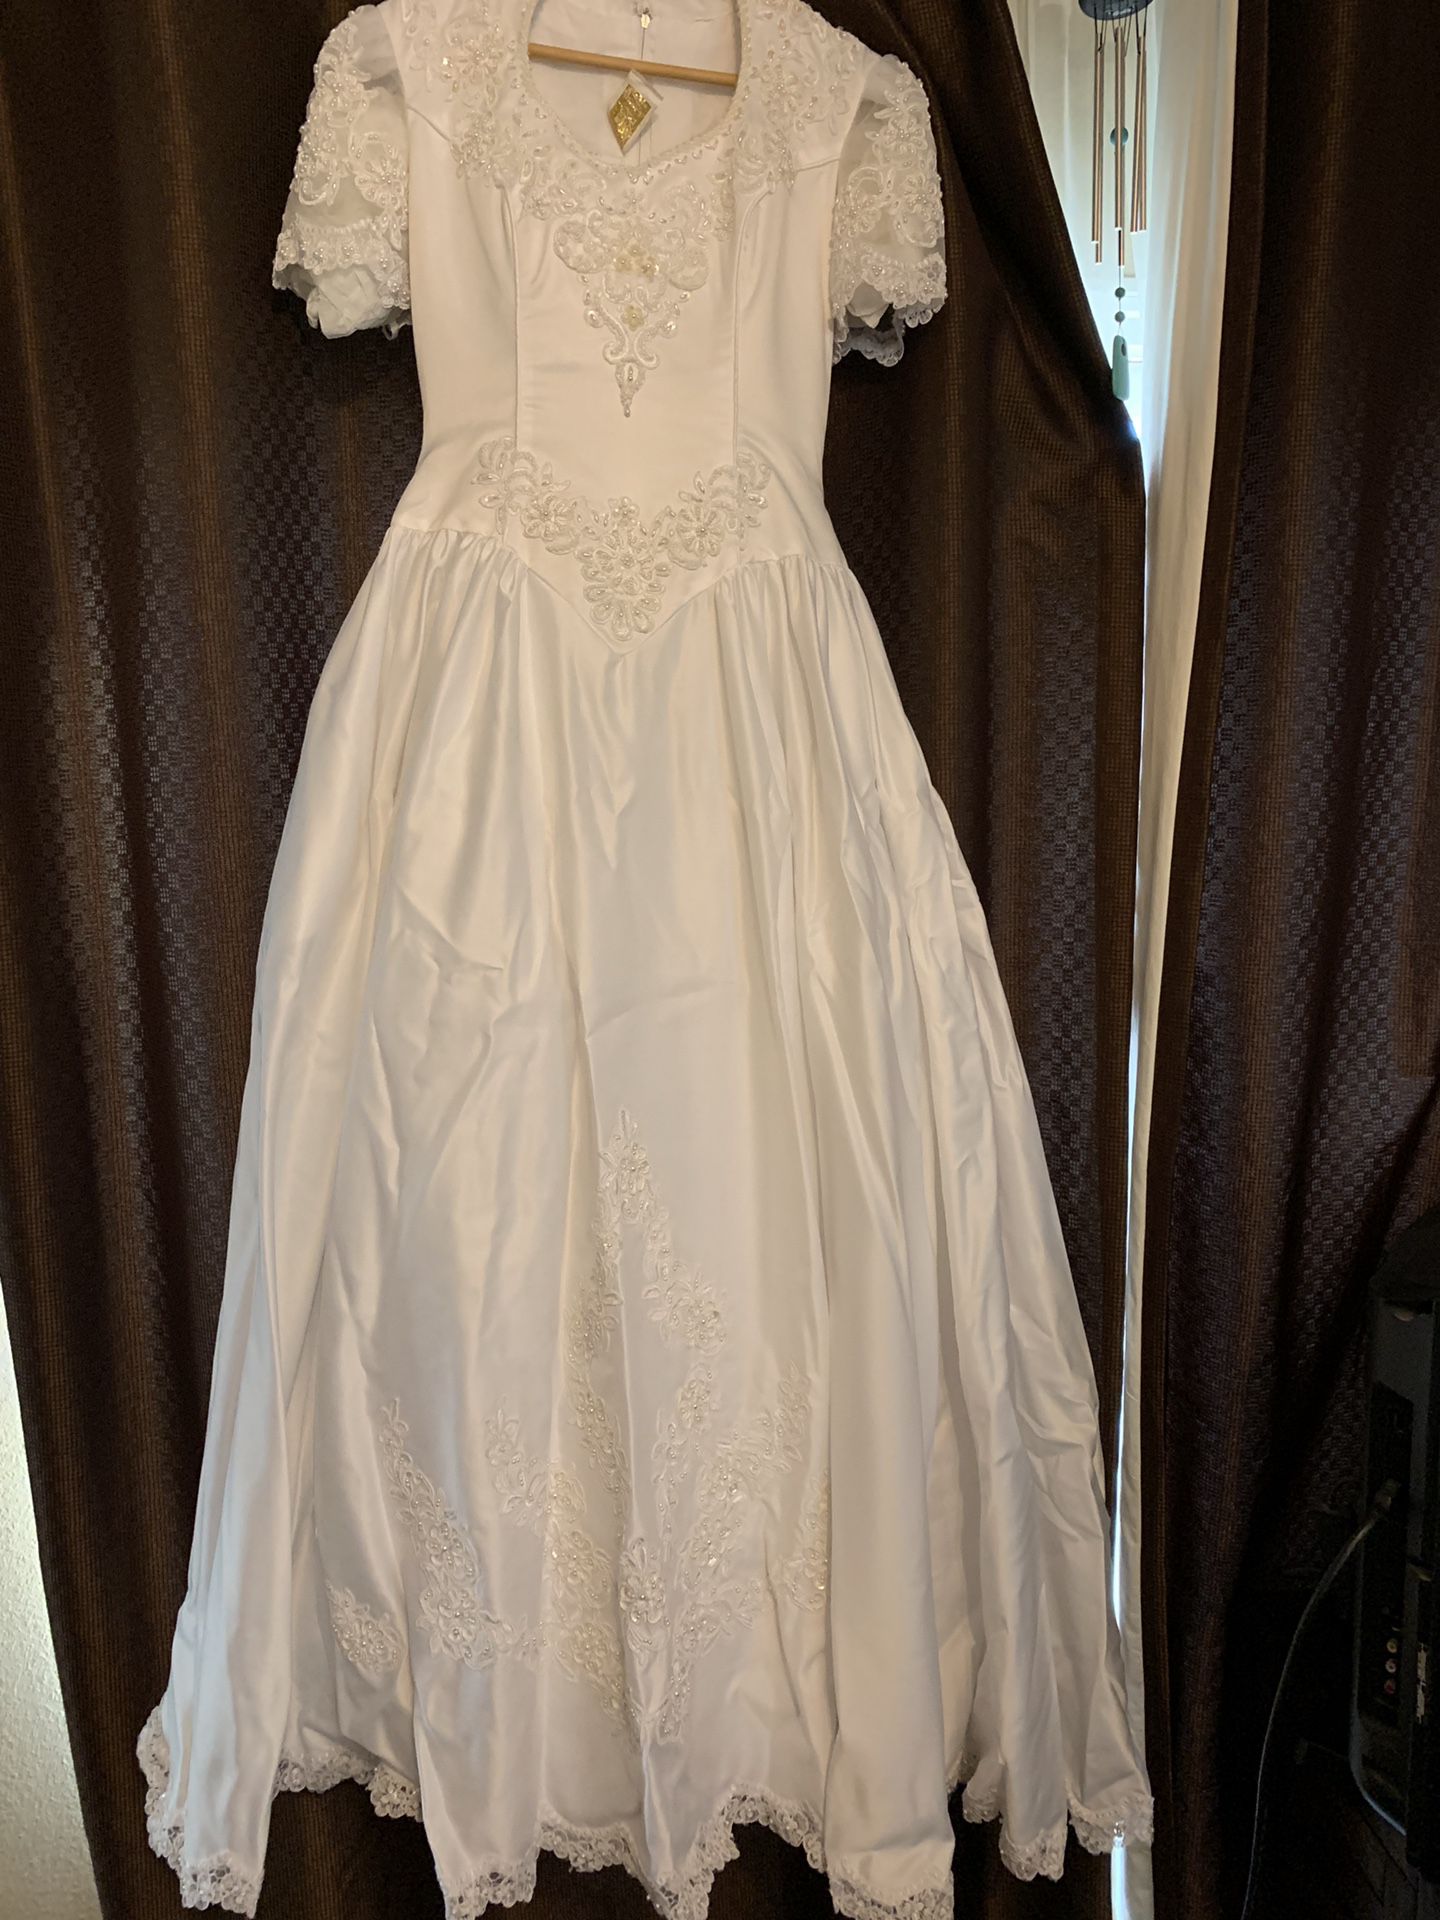 Wedding dress size 14 brand: Mary’s $25 obo (taking off site you end of week)